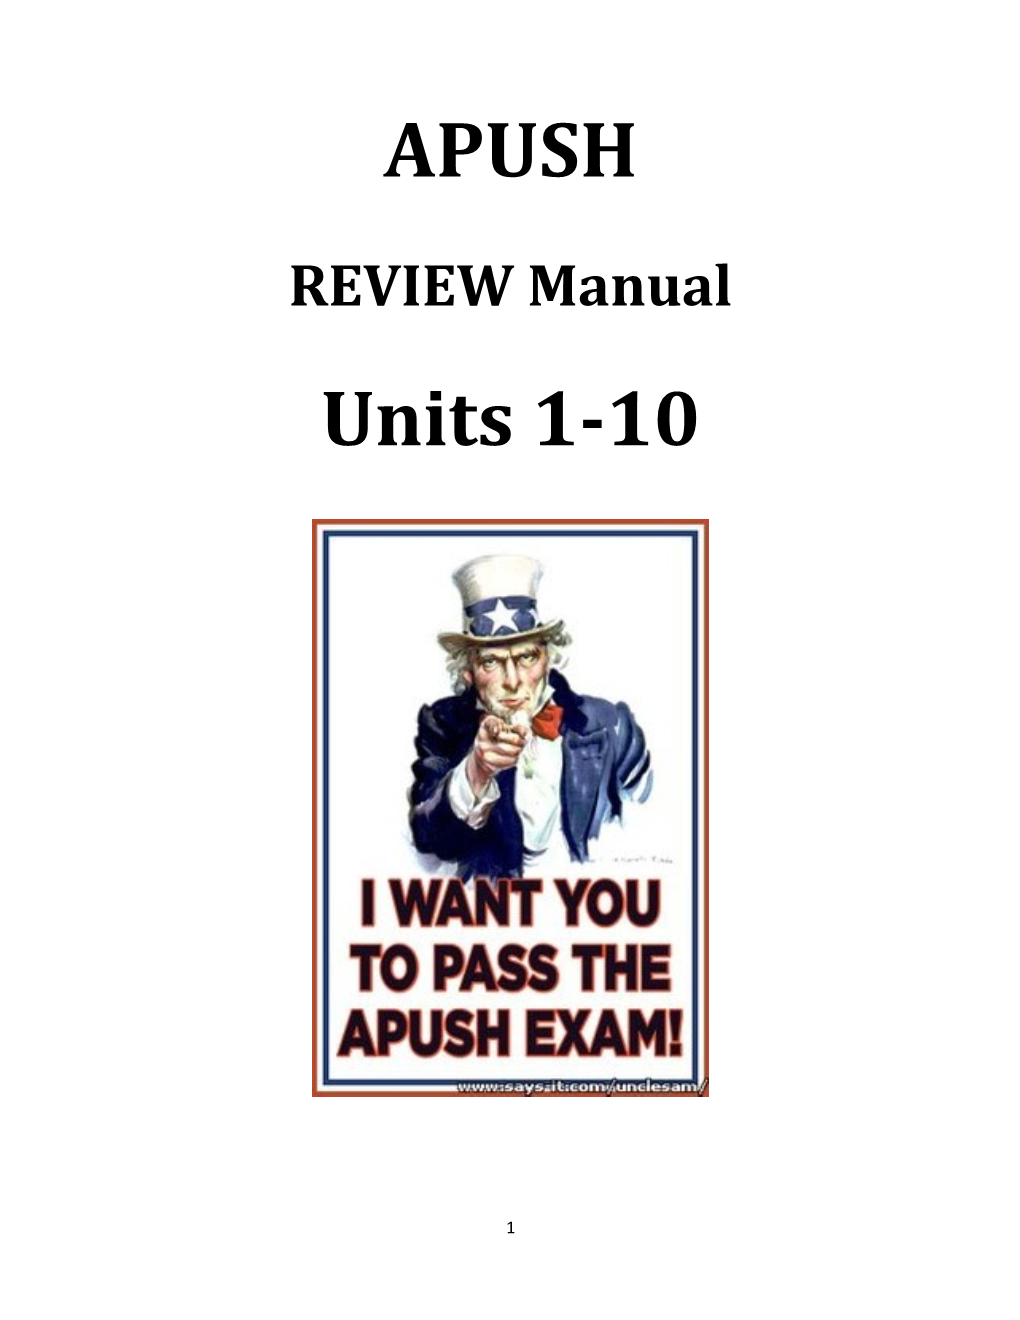 How to Analyze Unit and Reading Vocabulary Terms and Prepare Unit Comps Responses